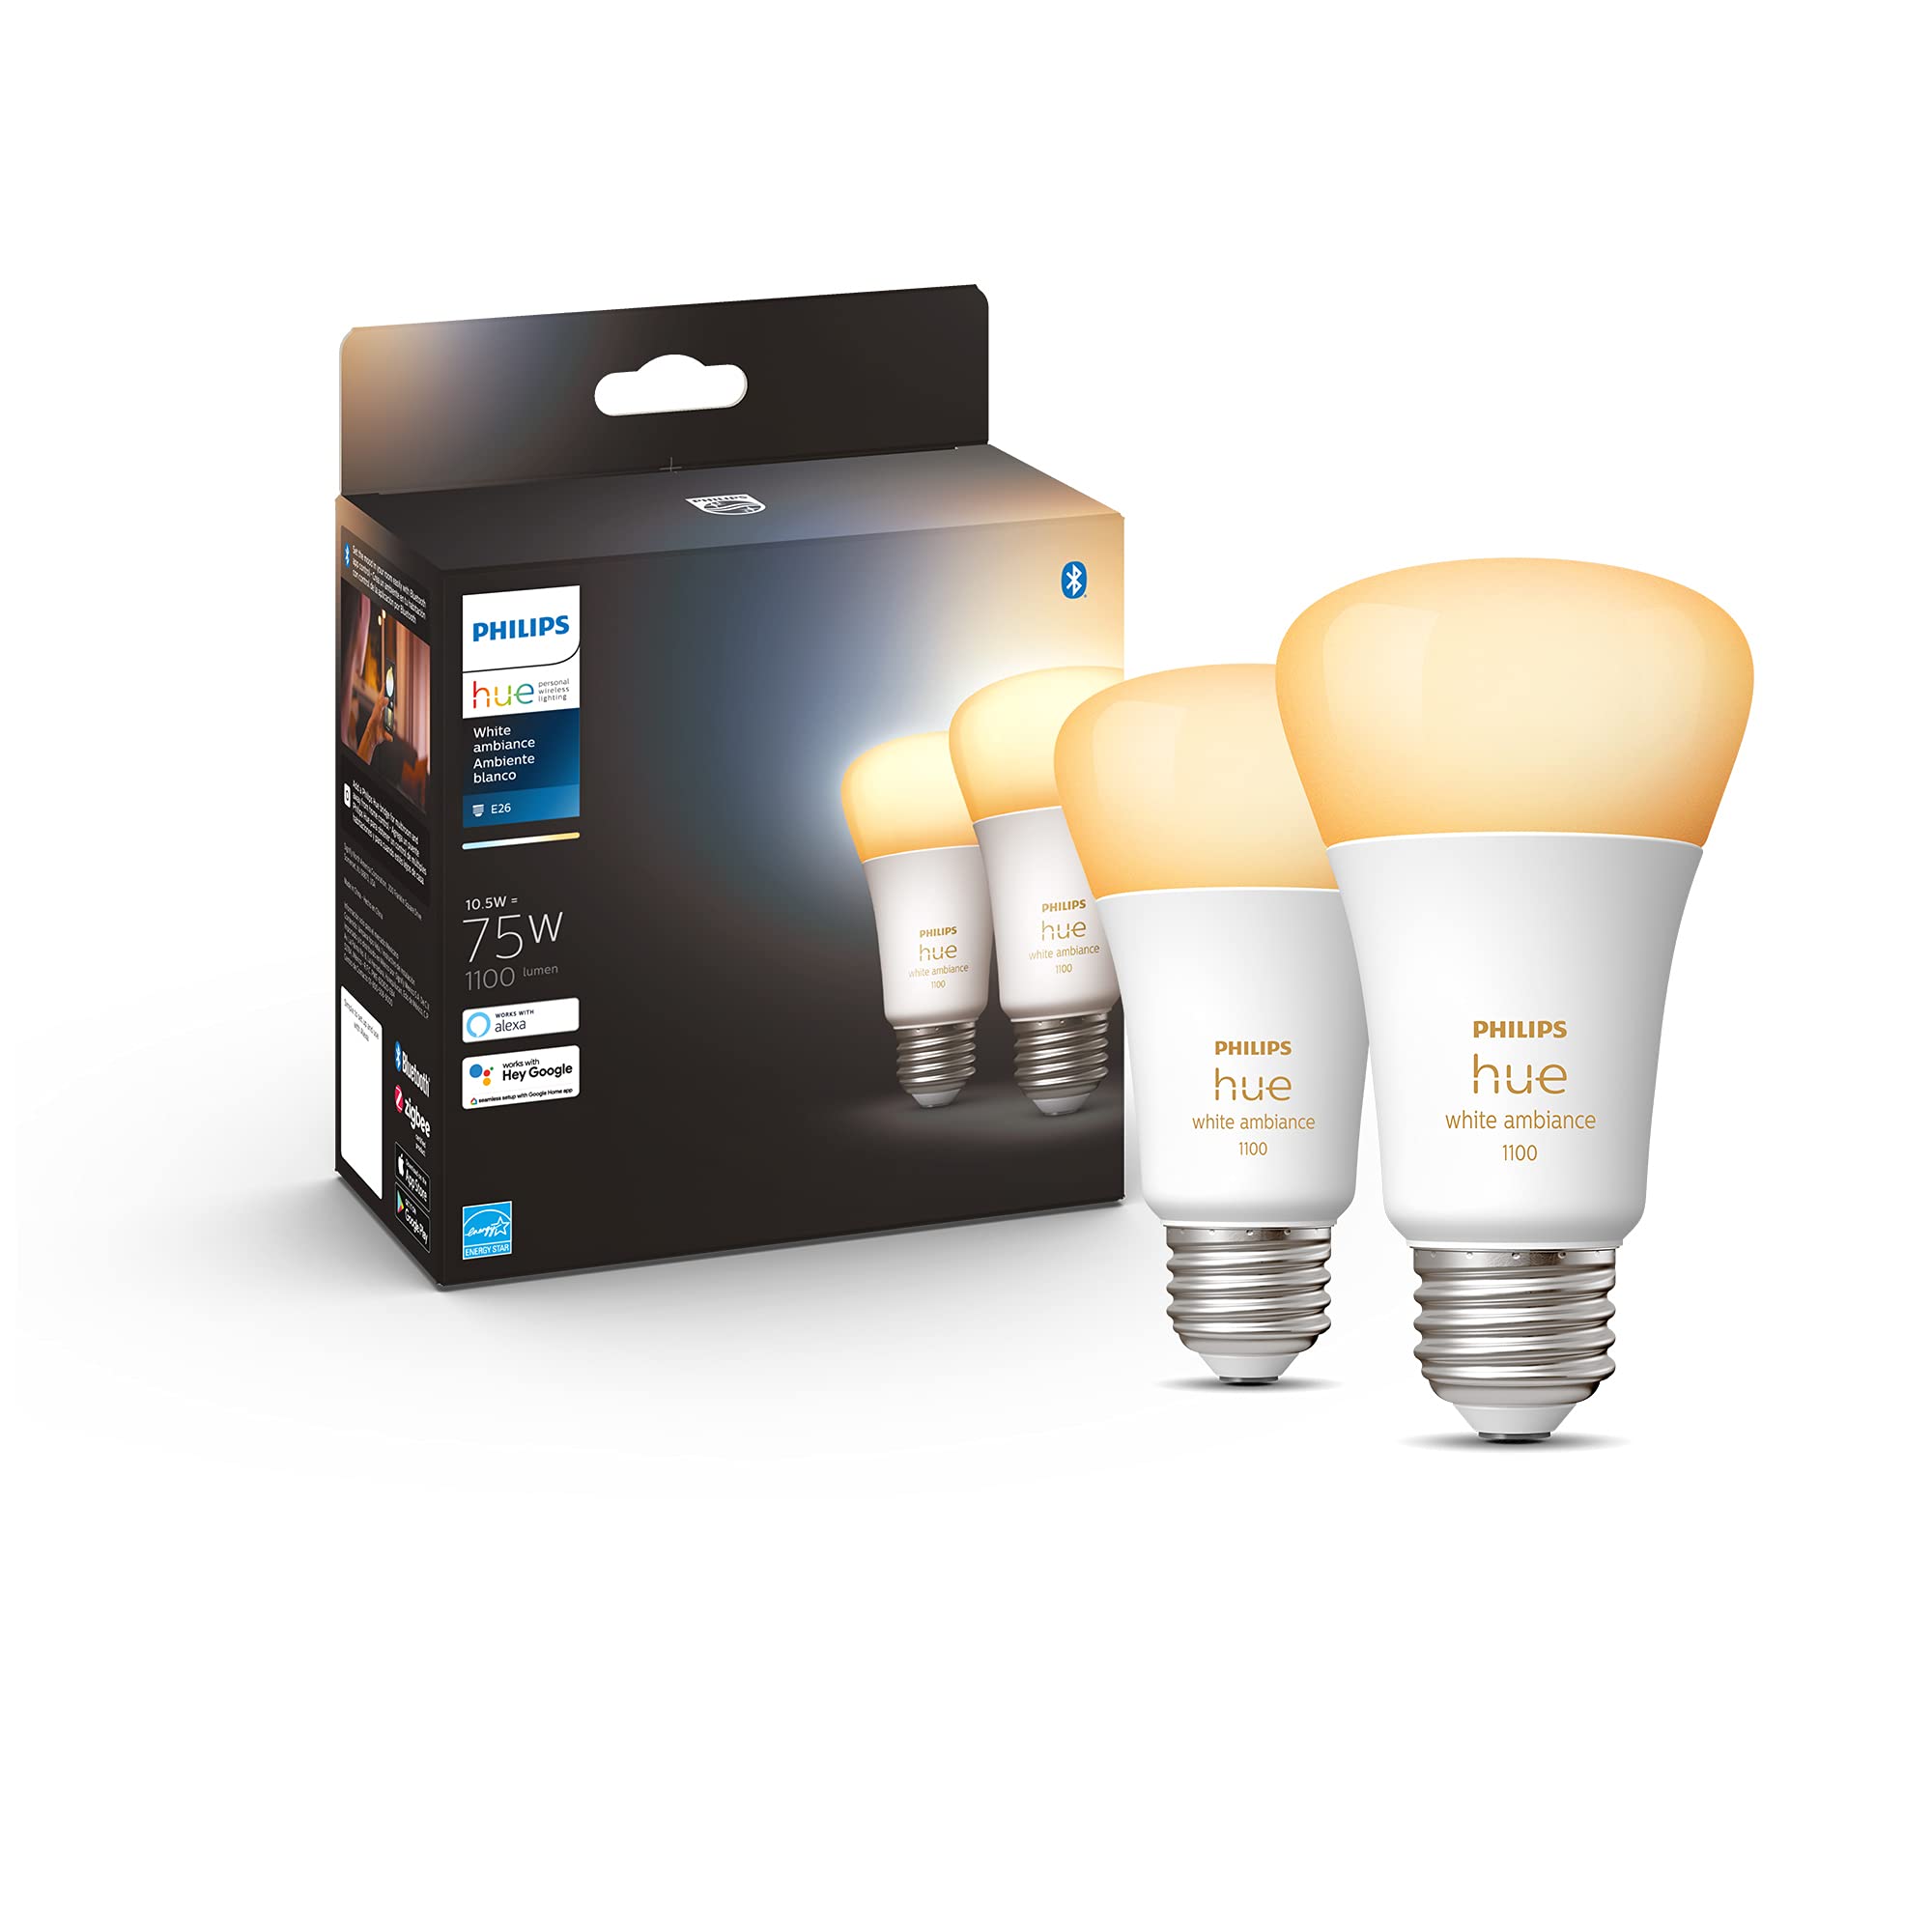 Targeted Amazon 15% off coupon on already discounted Philips Hue Smart 75W A19 LED Bulb - White Ambiance  - 2 Pack - $32.29